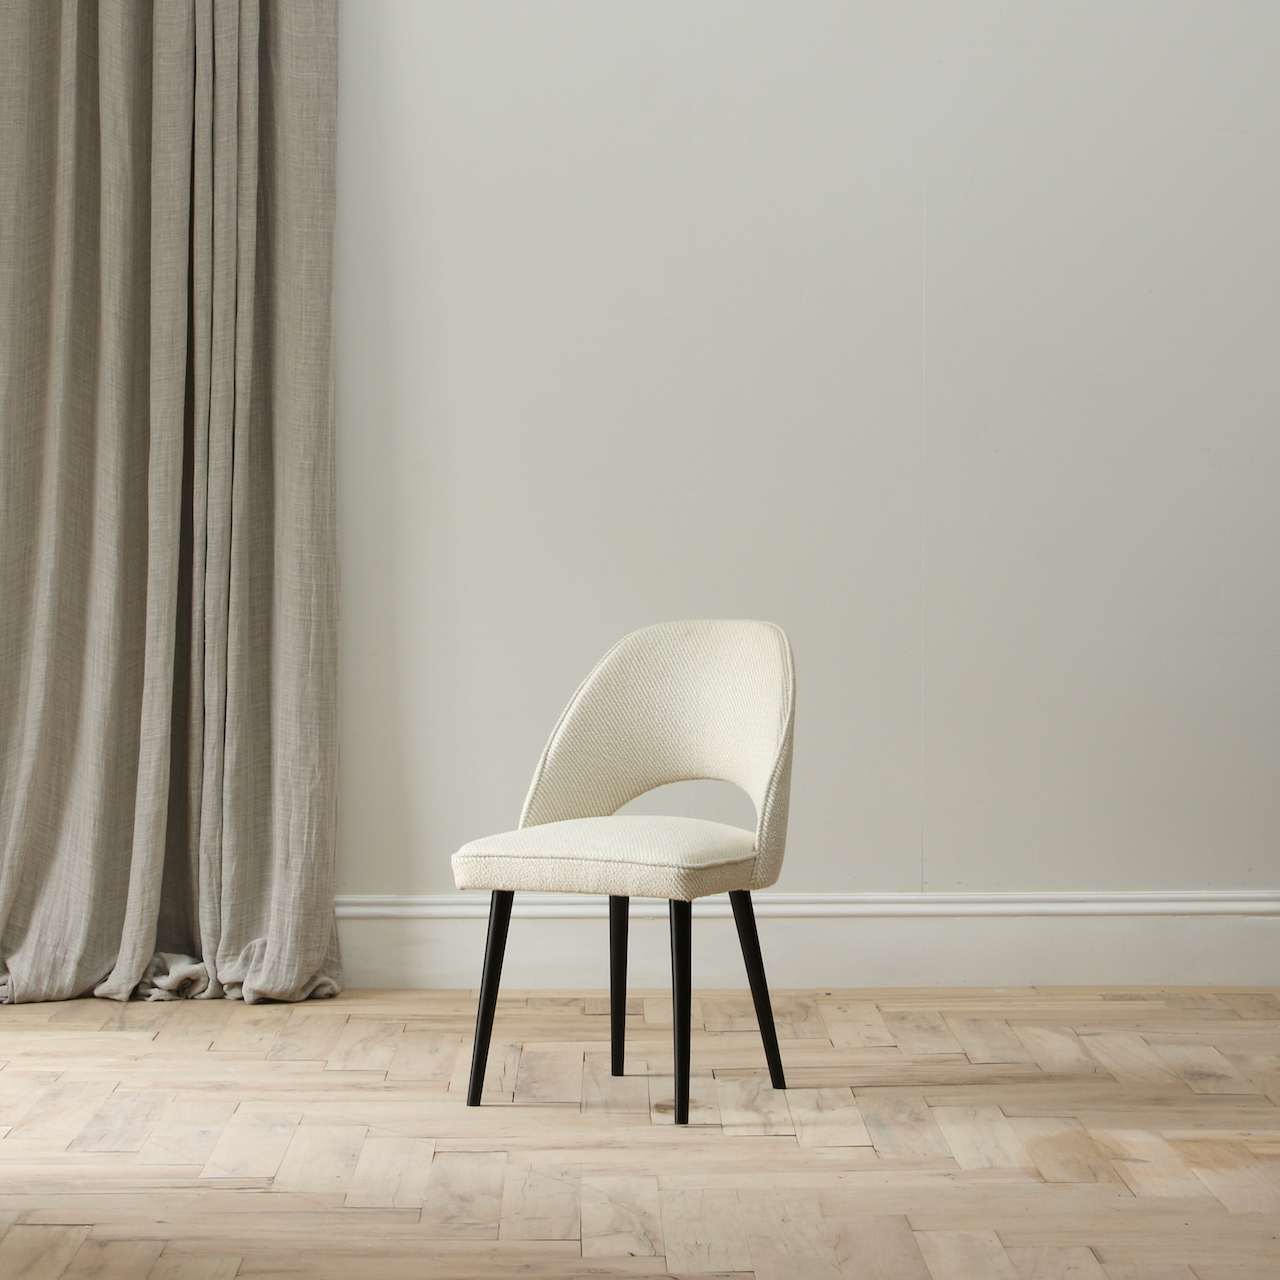 131-32 - Scala Dining Chair